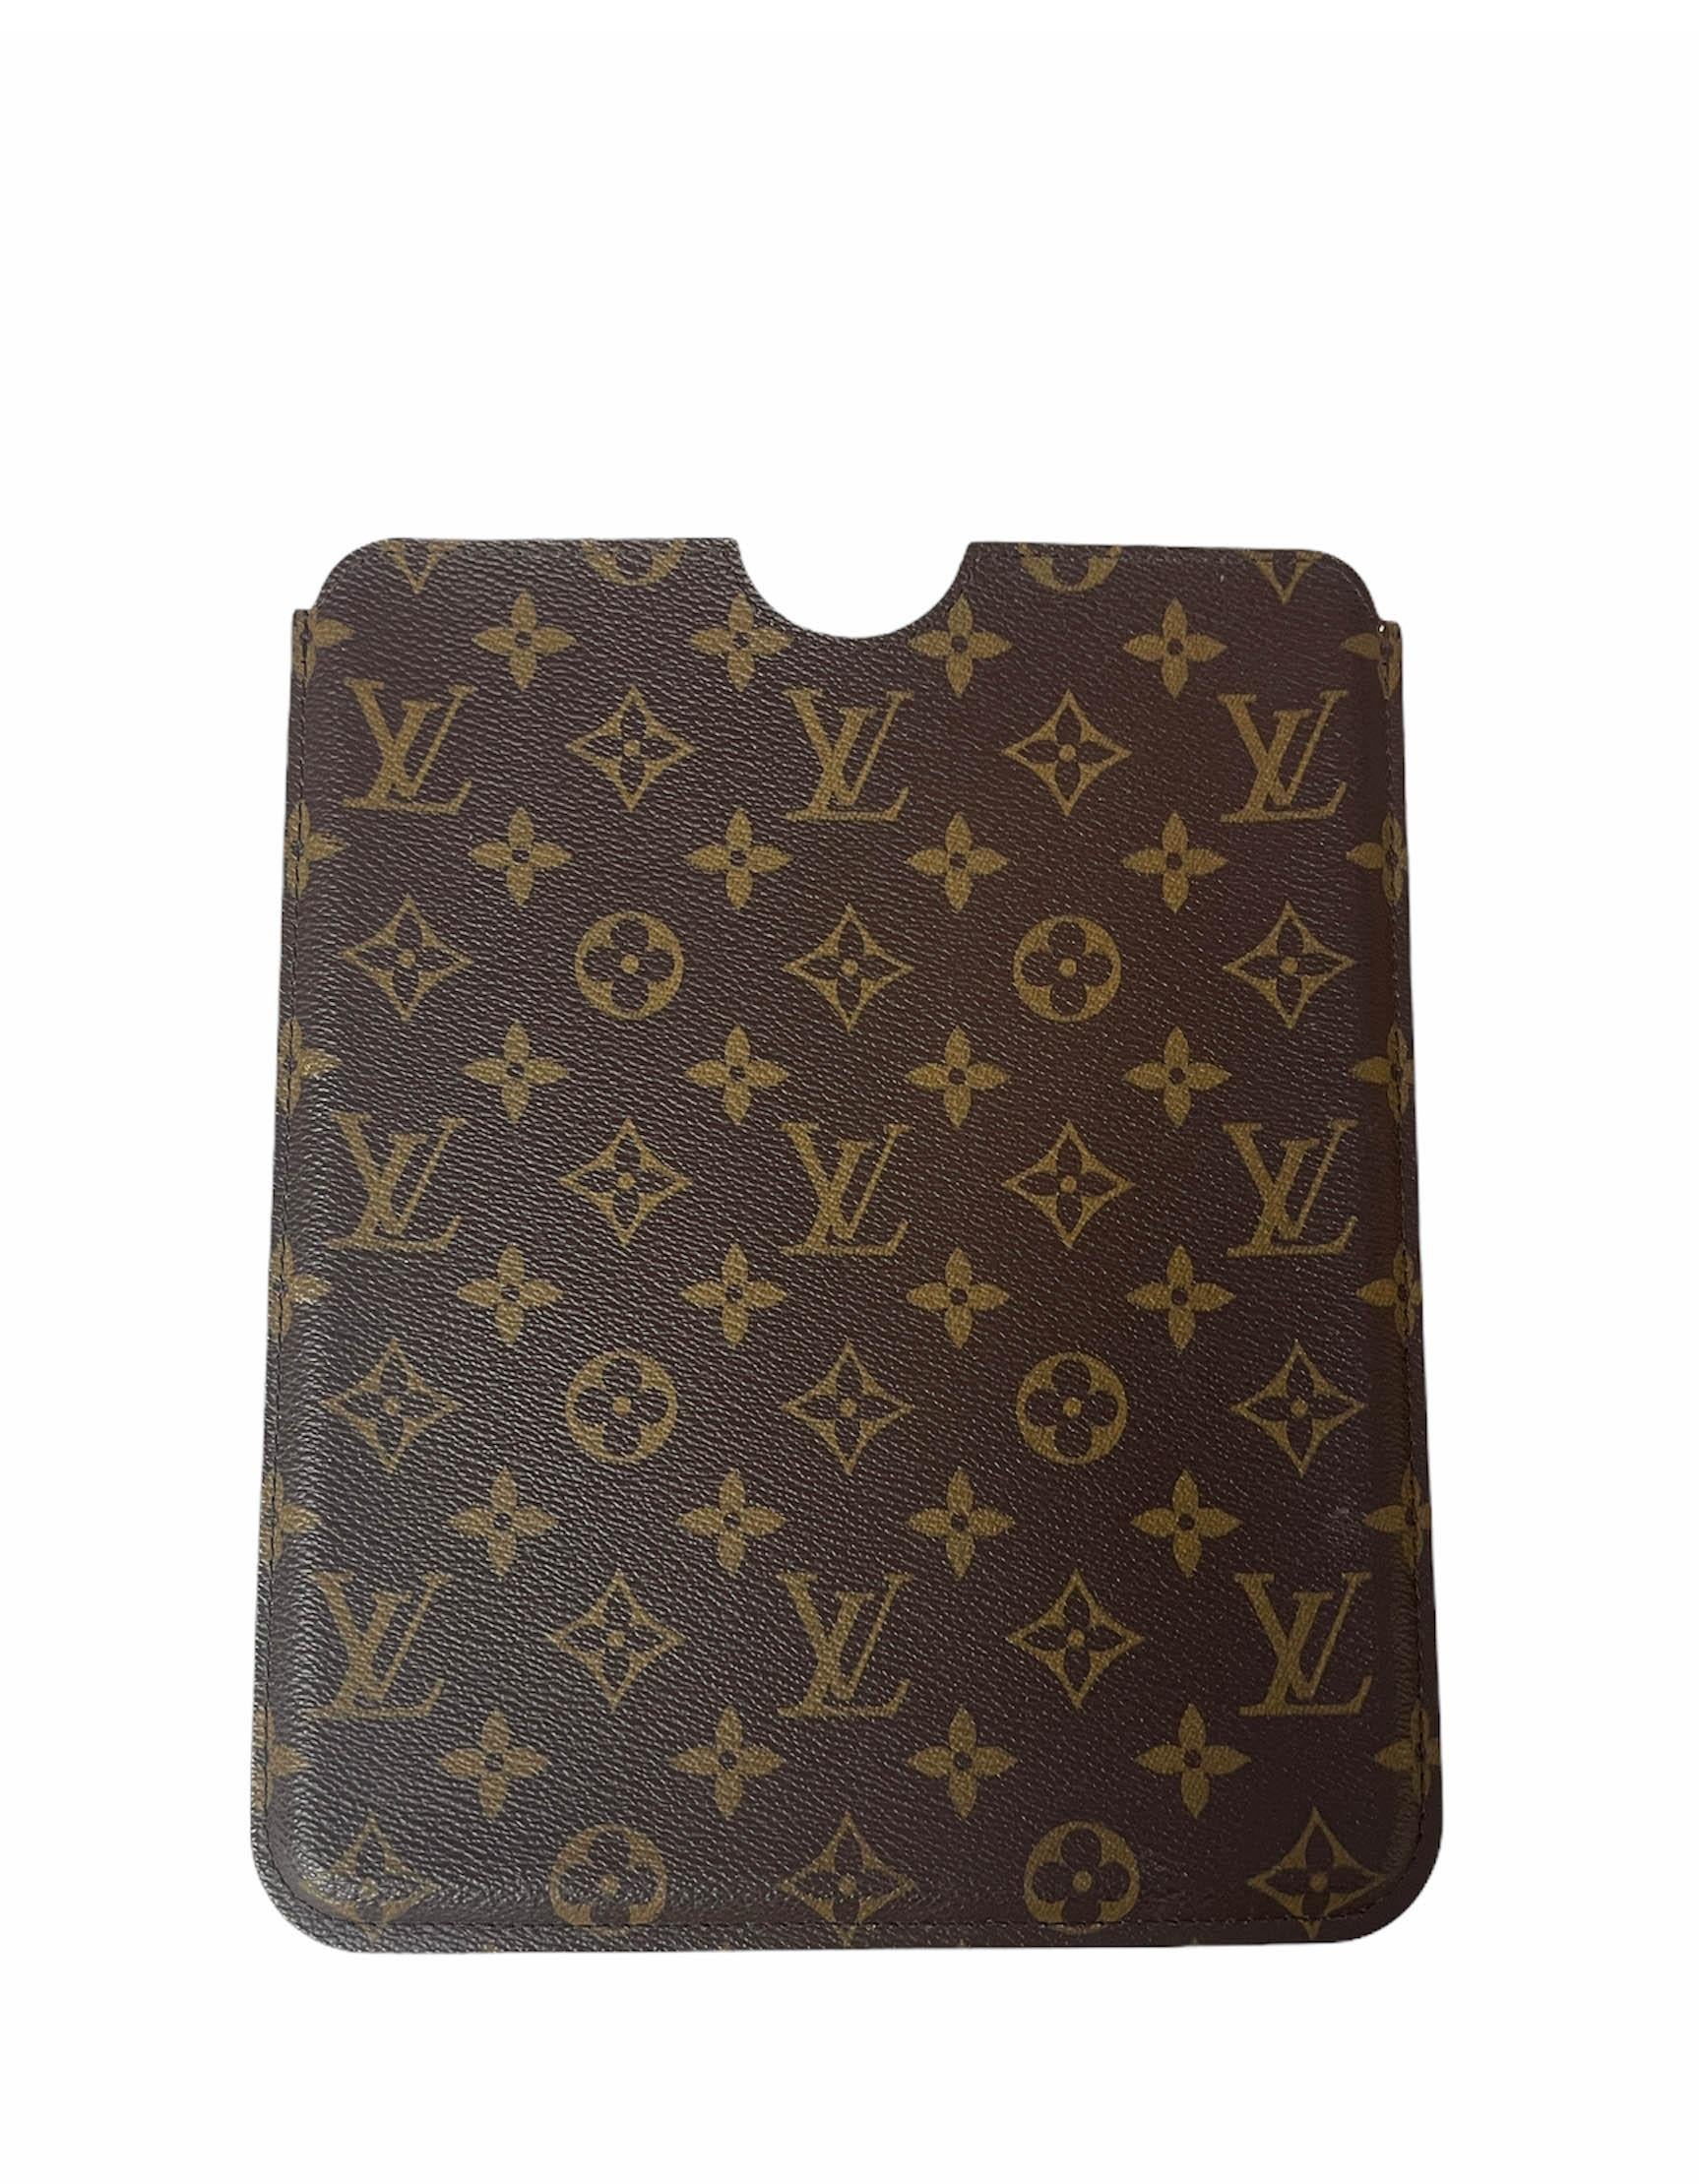 Louis Vuitton Monogram Hardcase Cover Ipad 2

Made In: France
Year of Production: 2010
Color: Brown
Materials: Coated canvas
Lining: Alcantara
Closure/Opening: Top slit
Exterior Condition: Excellent with light wear throughout and edges
Interior